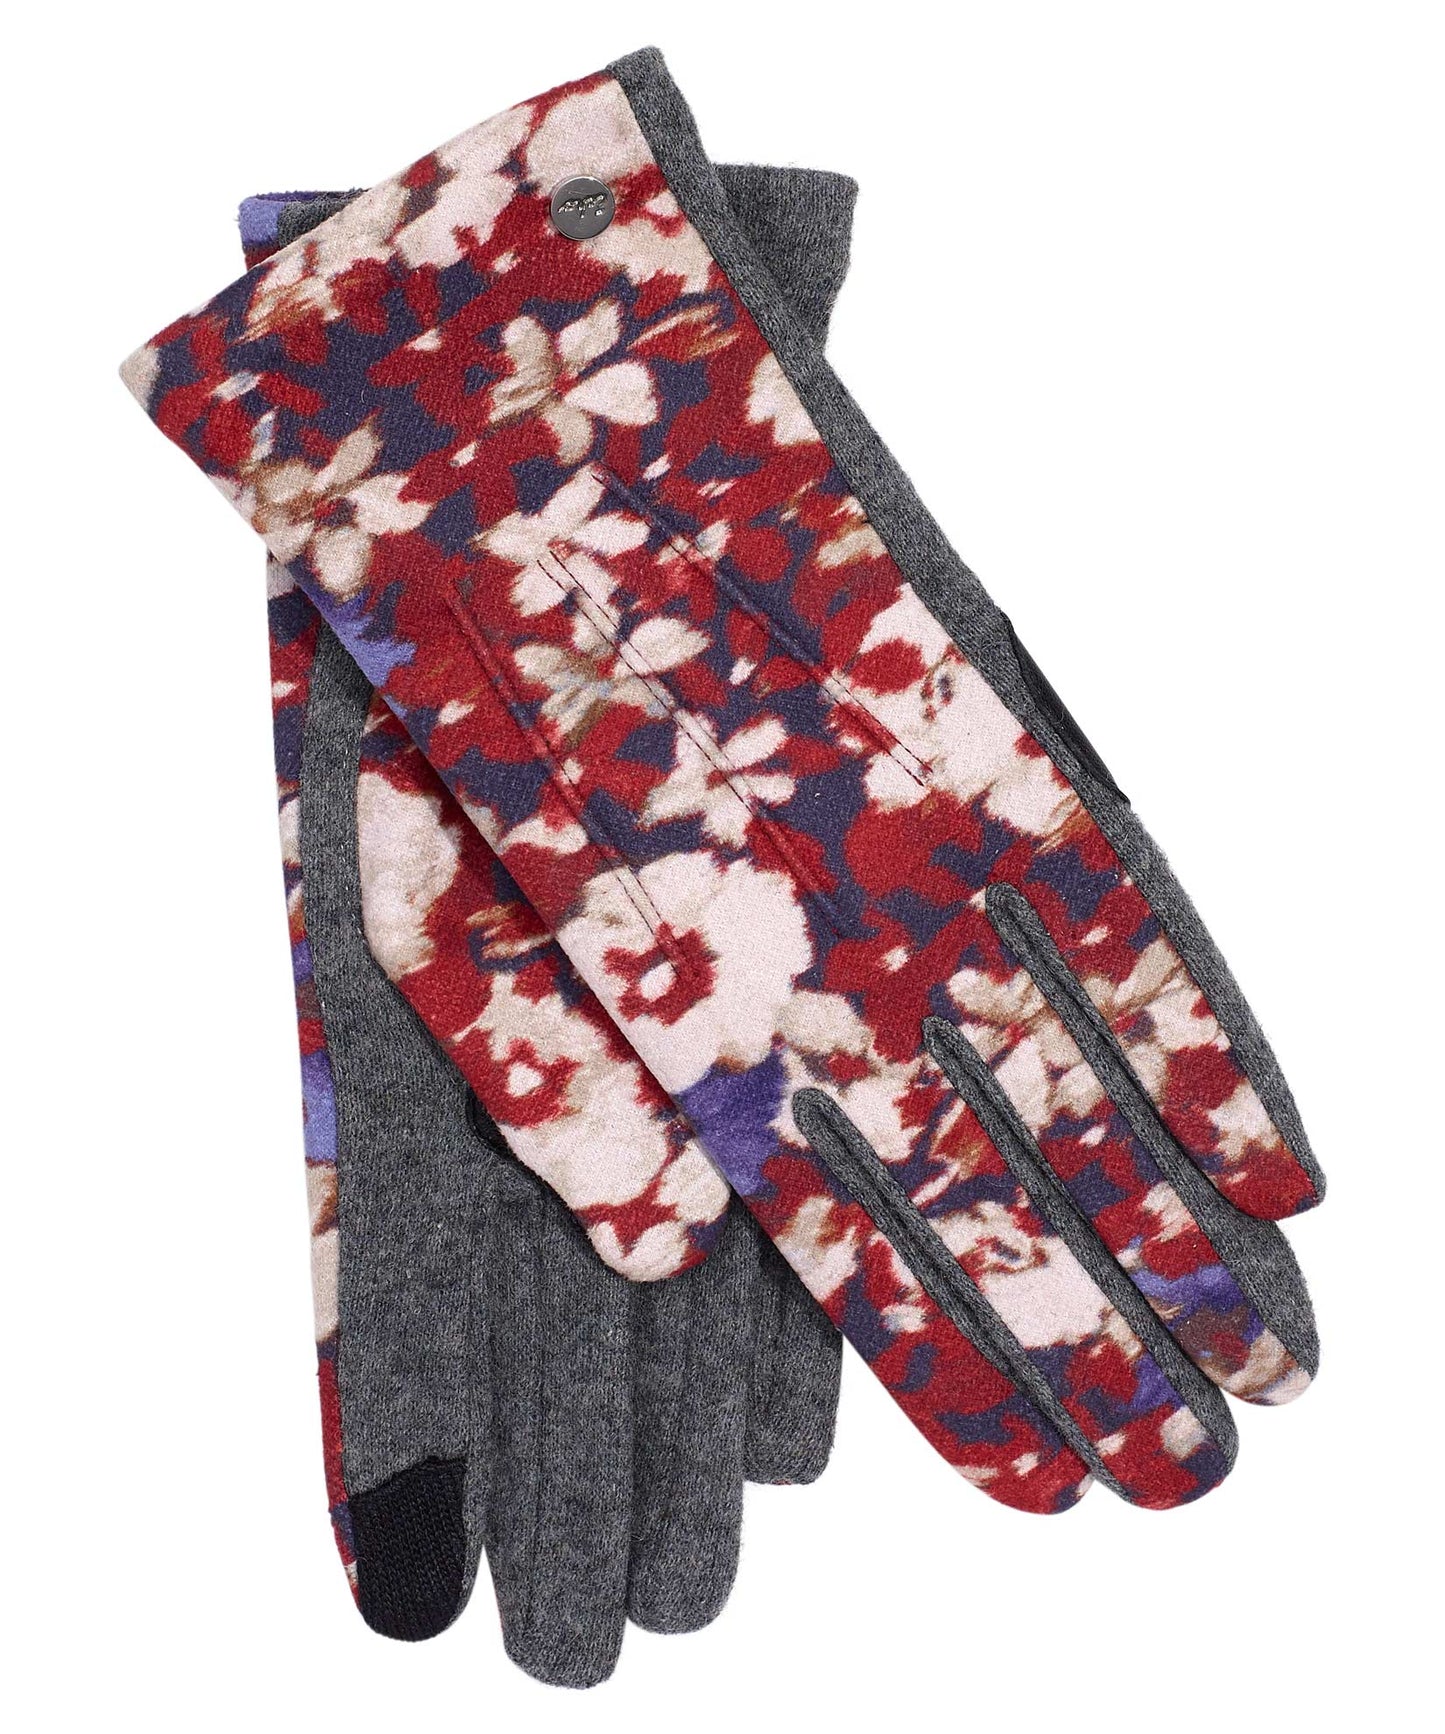 Floral Print Classic Touch Glove in color Ruby Red